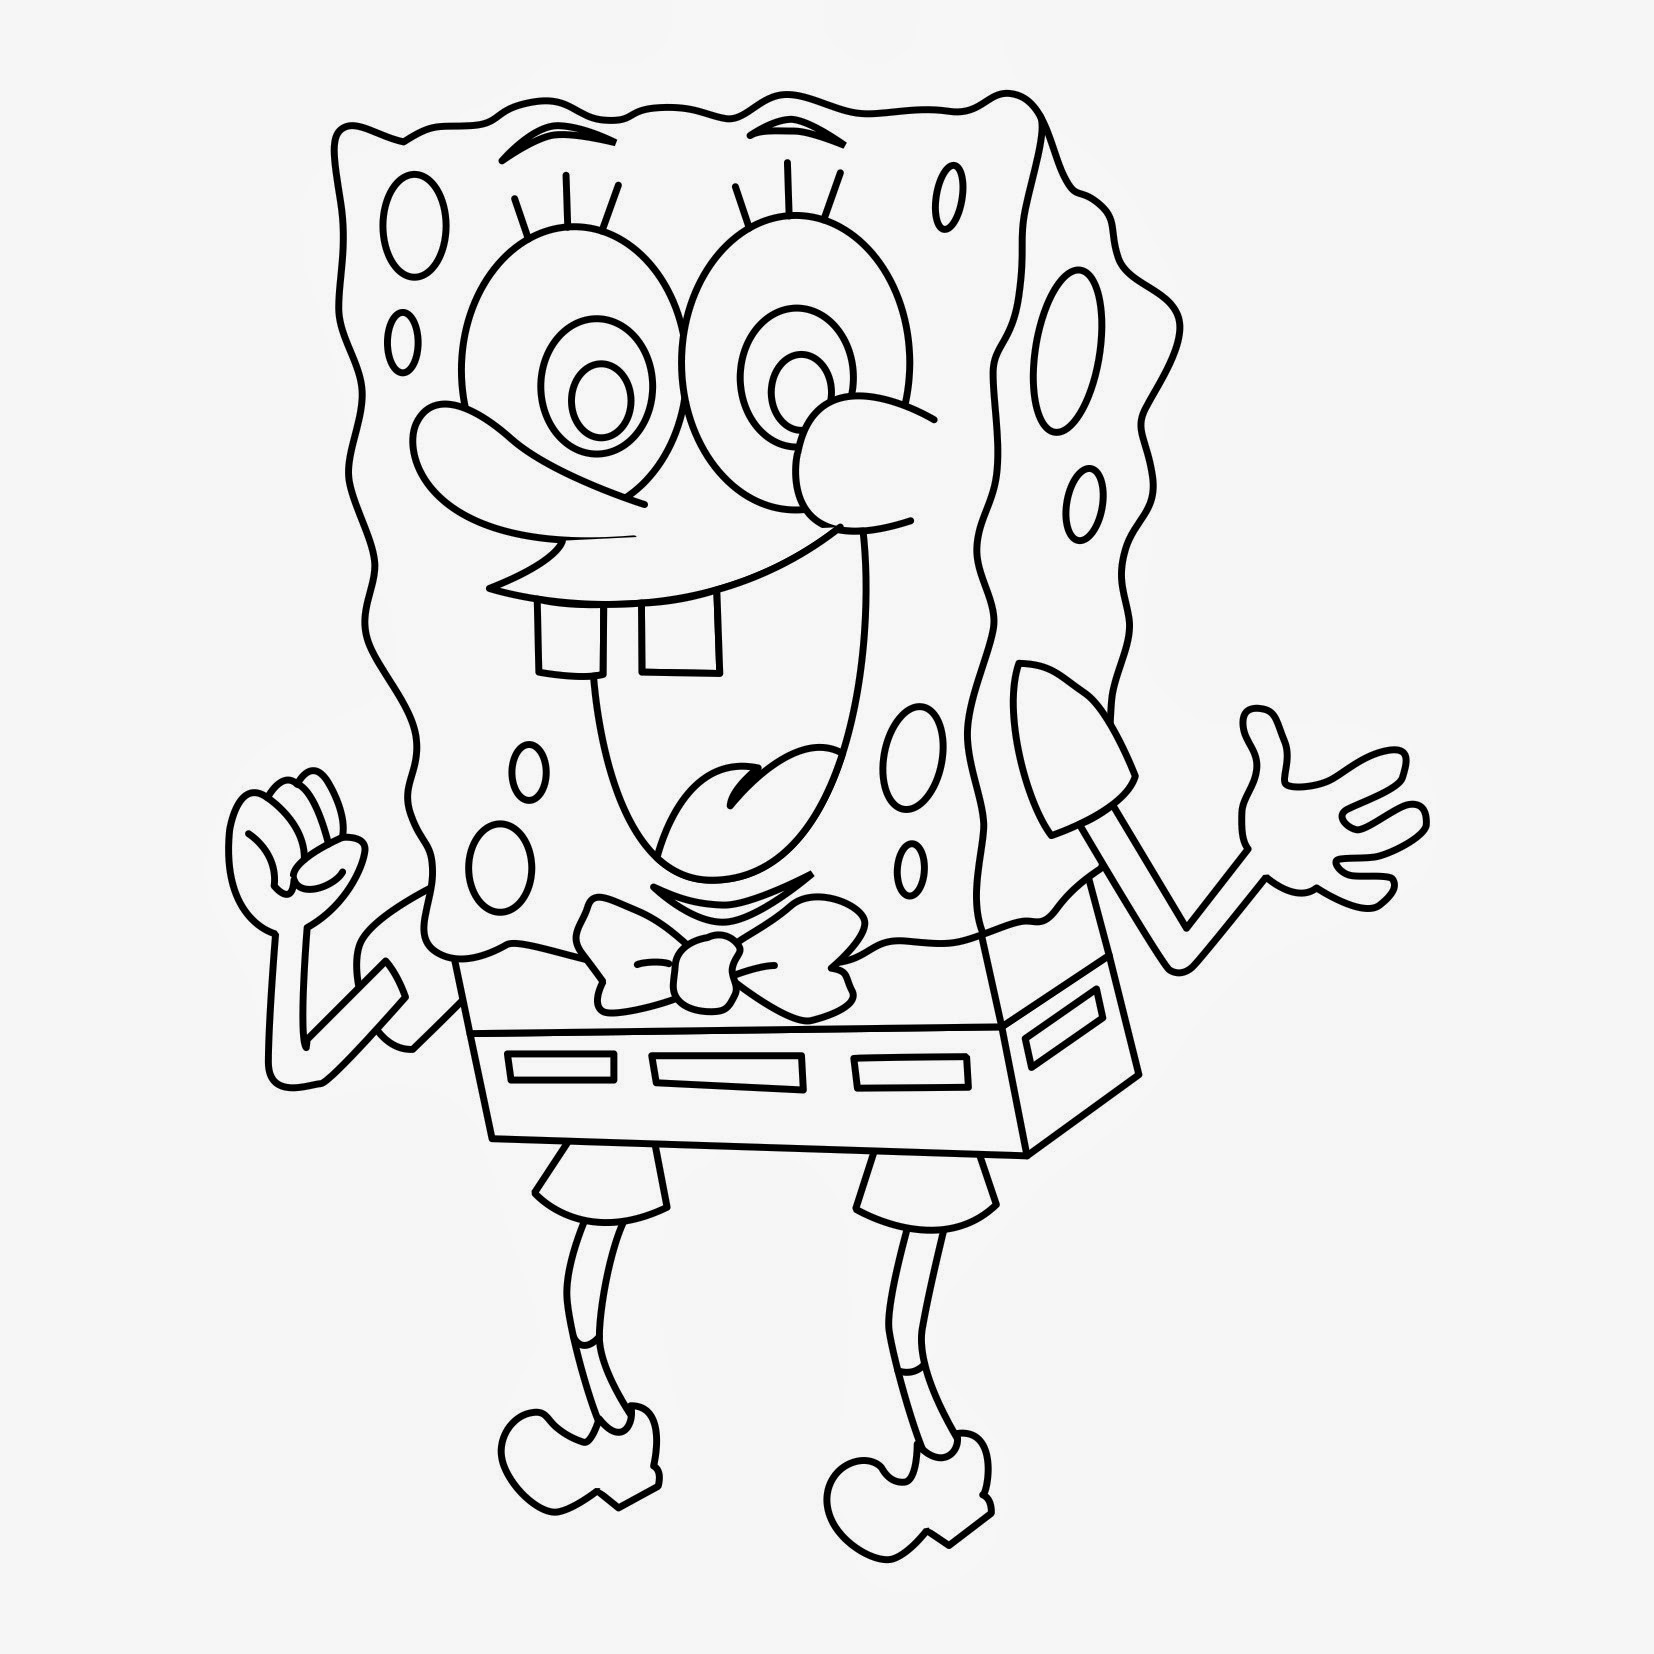 Download Coloring Page Printable Spongebob - 316+ Best Free SVG File for Cricut, Silhouette and Other Machine